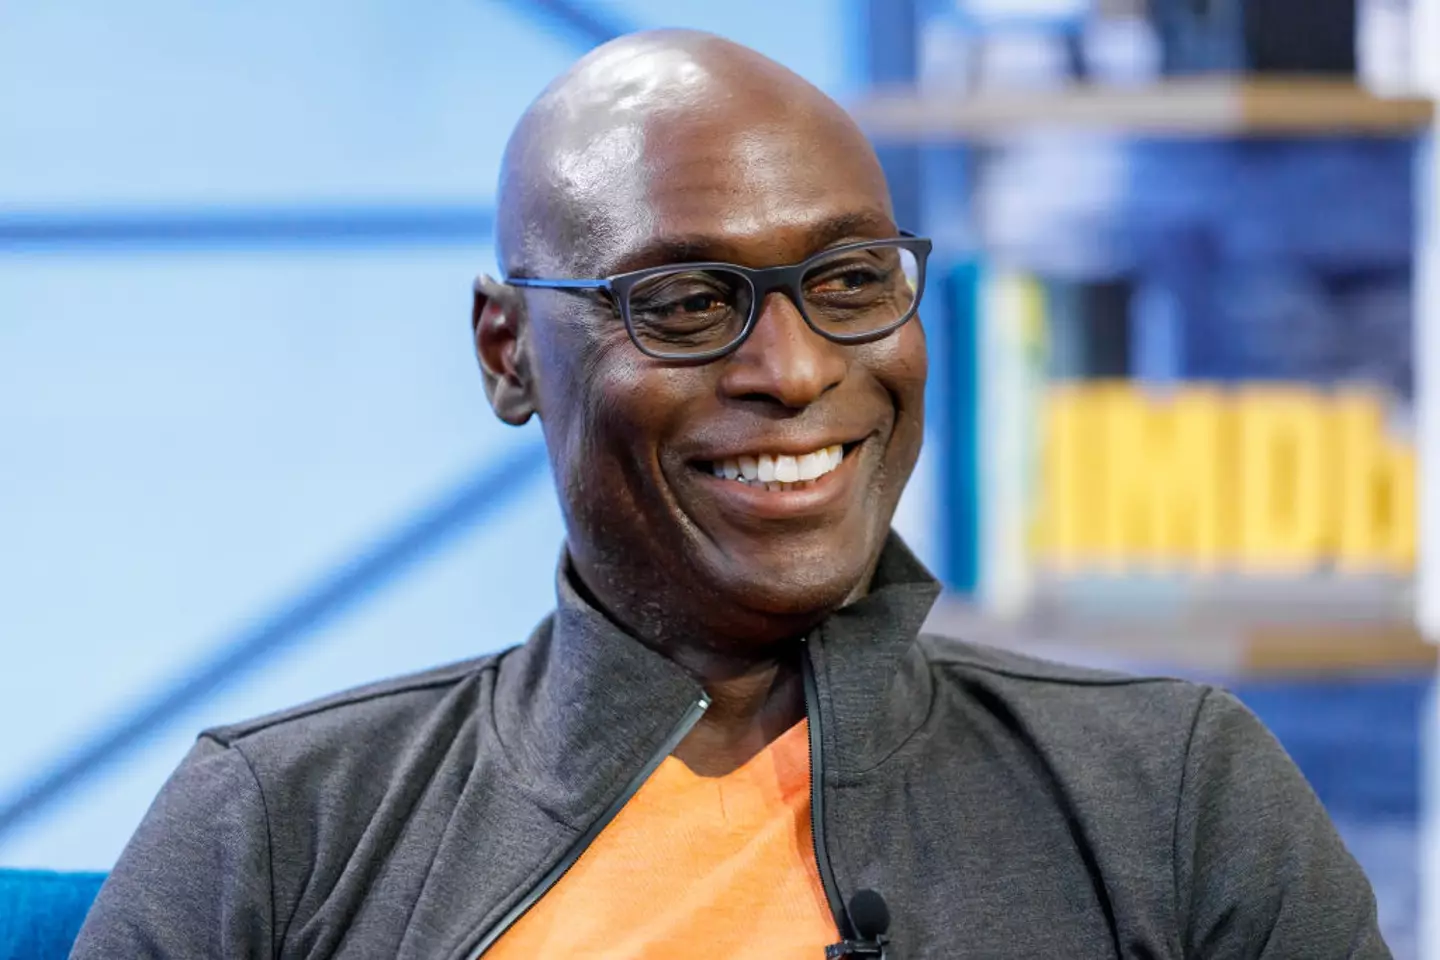 Lance Reddick died at the age of 60.